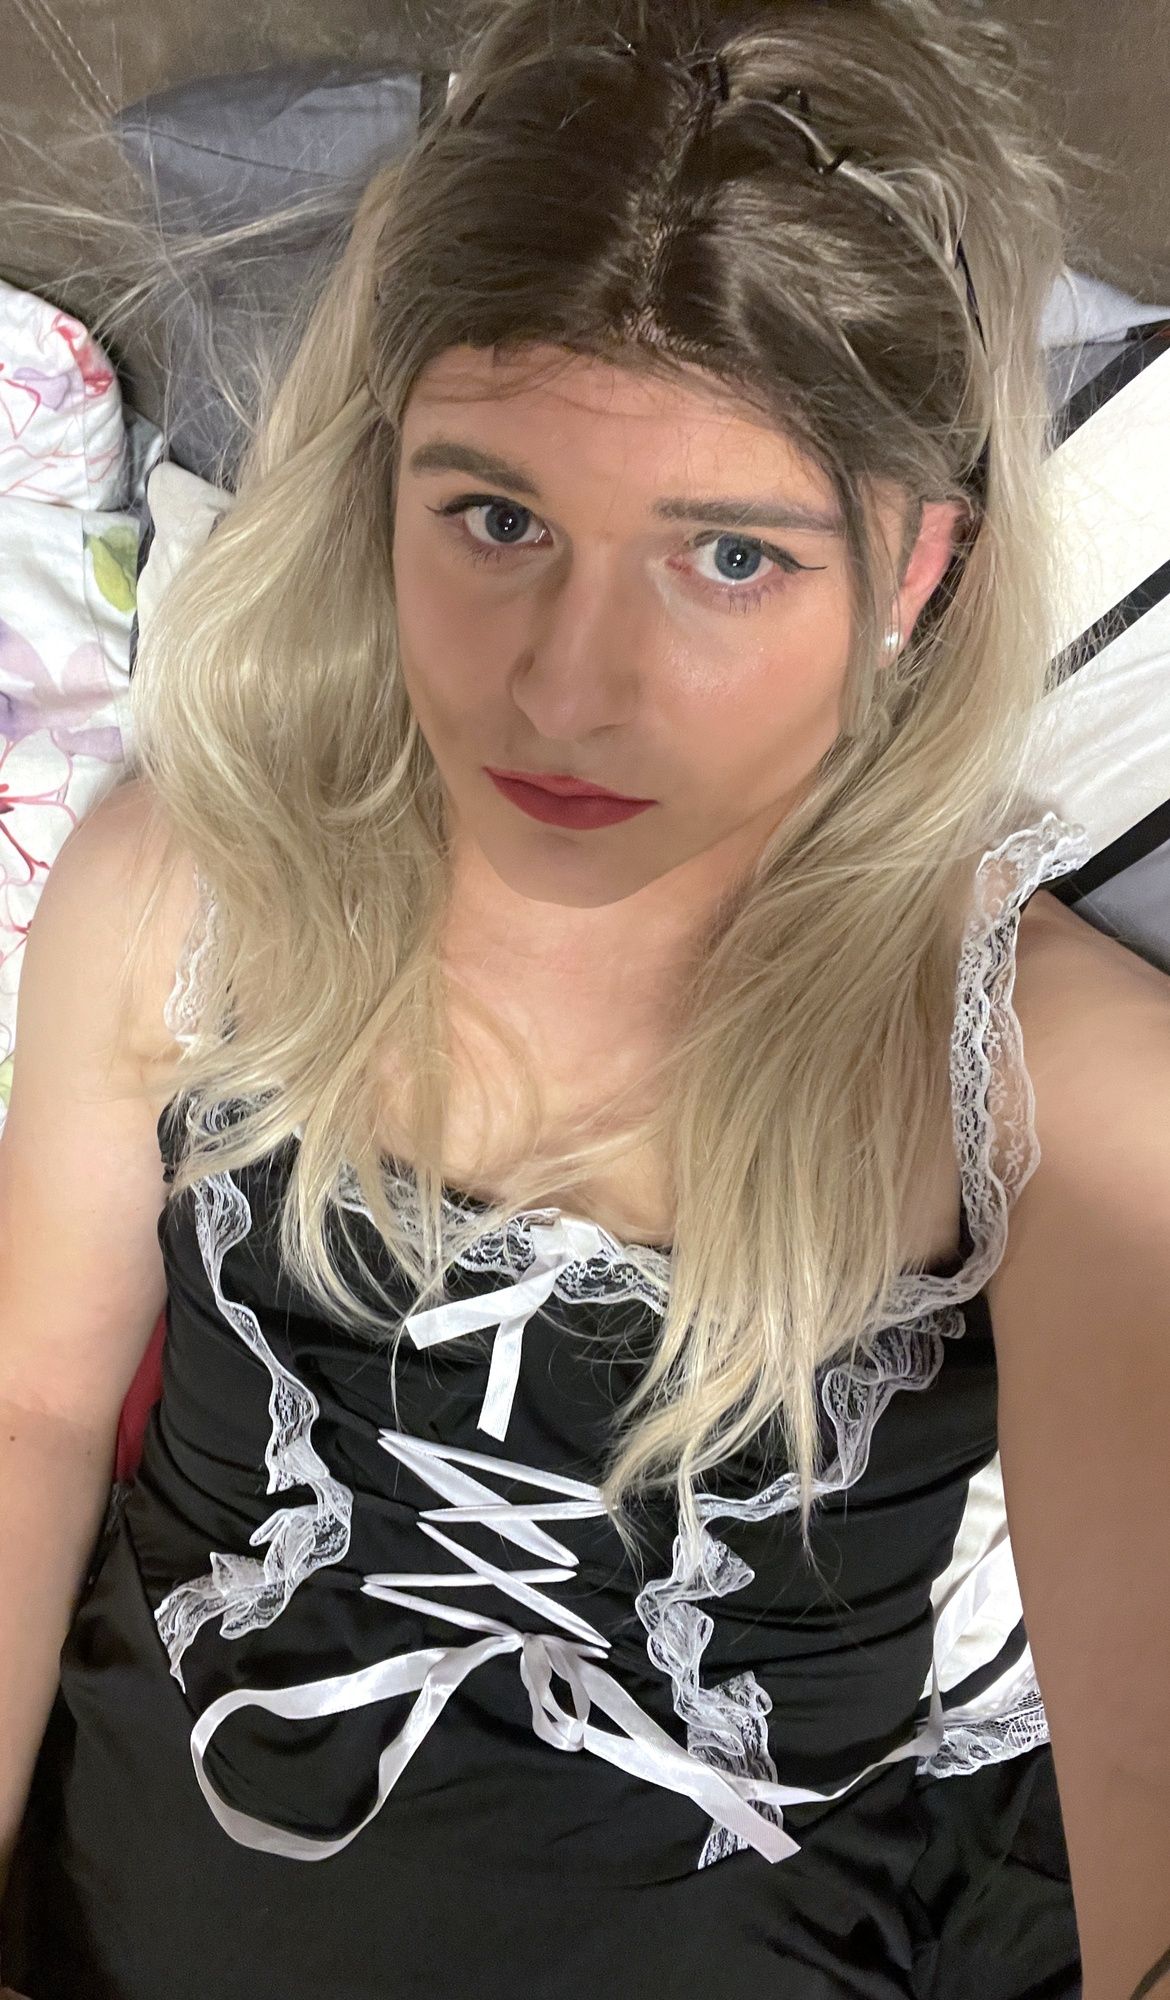 Sissy vallicxte: Love this wig 